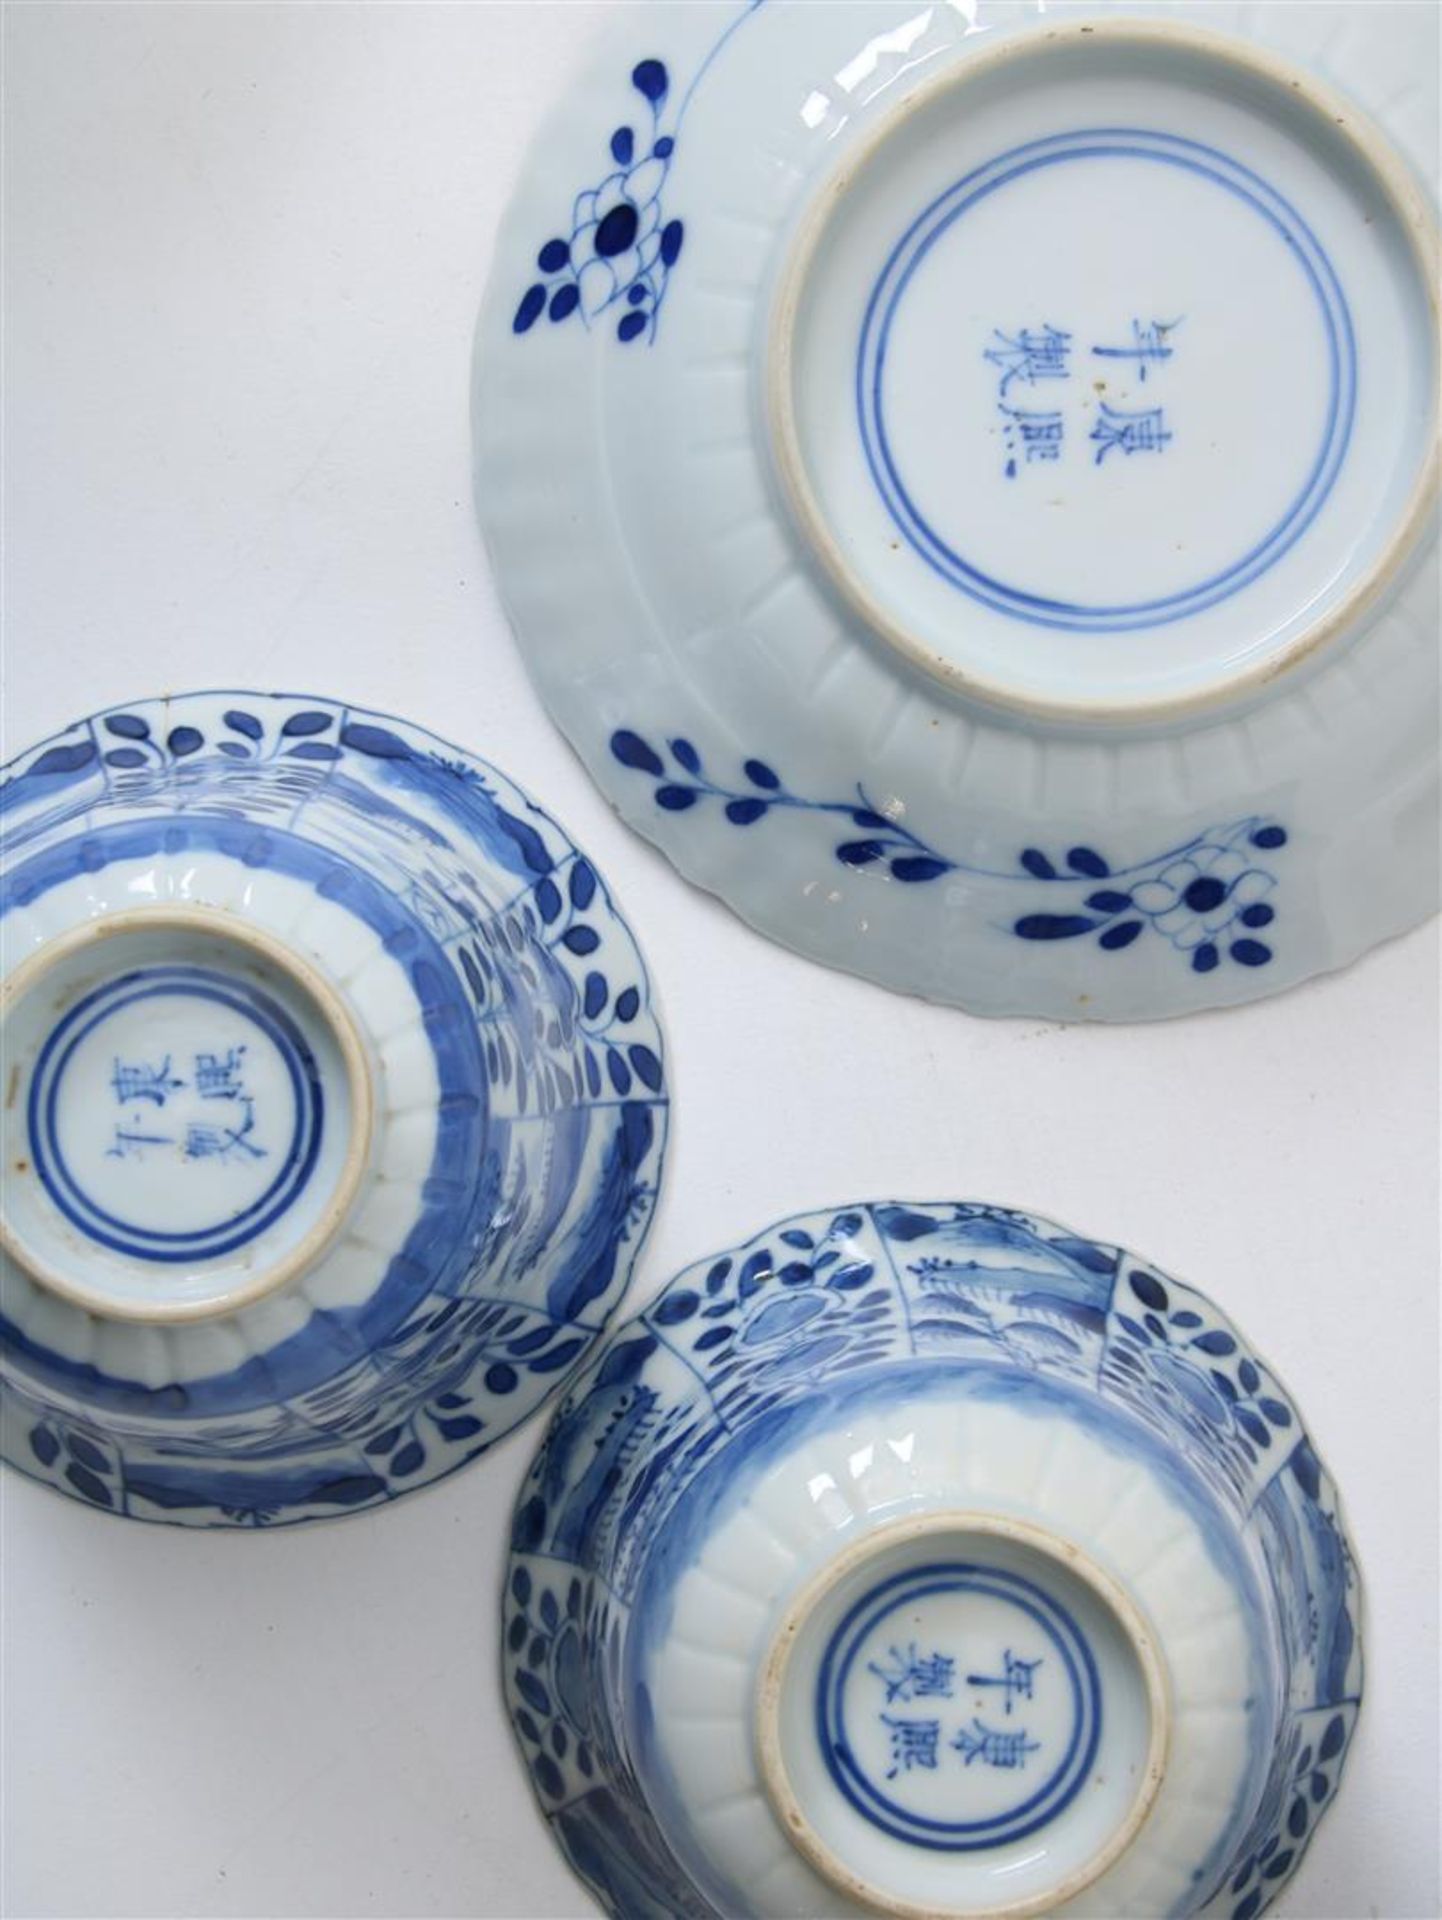 Lot of 13 porcelain cups and 10 saucers decorated with landscapes and parsley decor, Kangxi mark, - Image 8 of 8